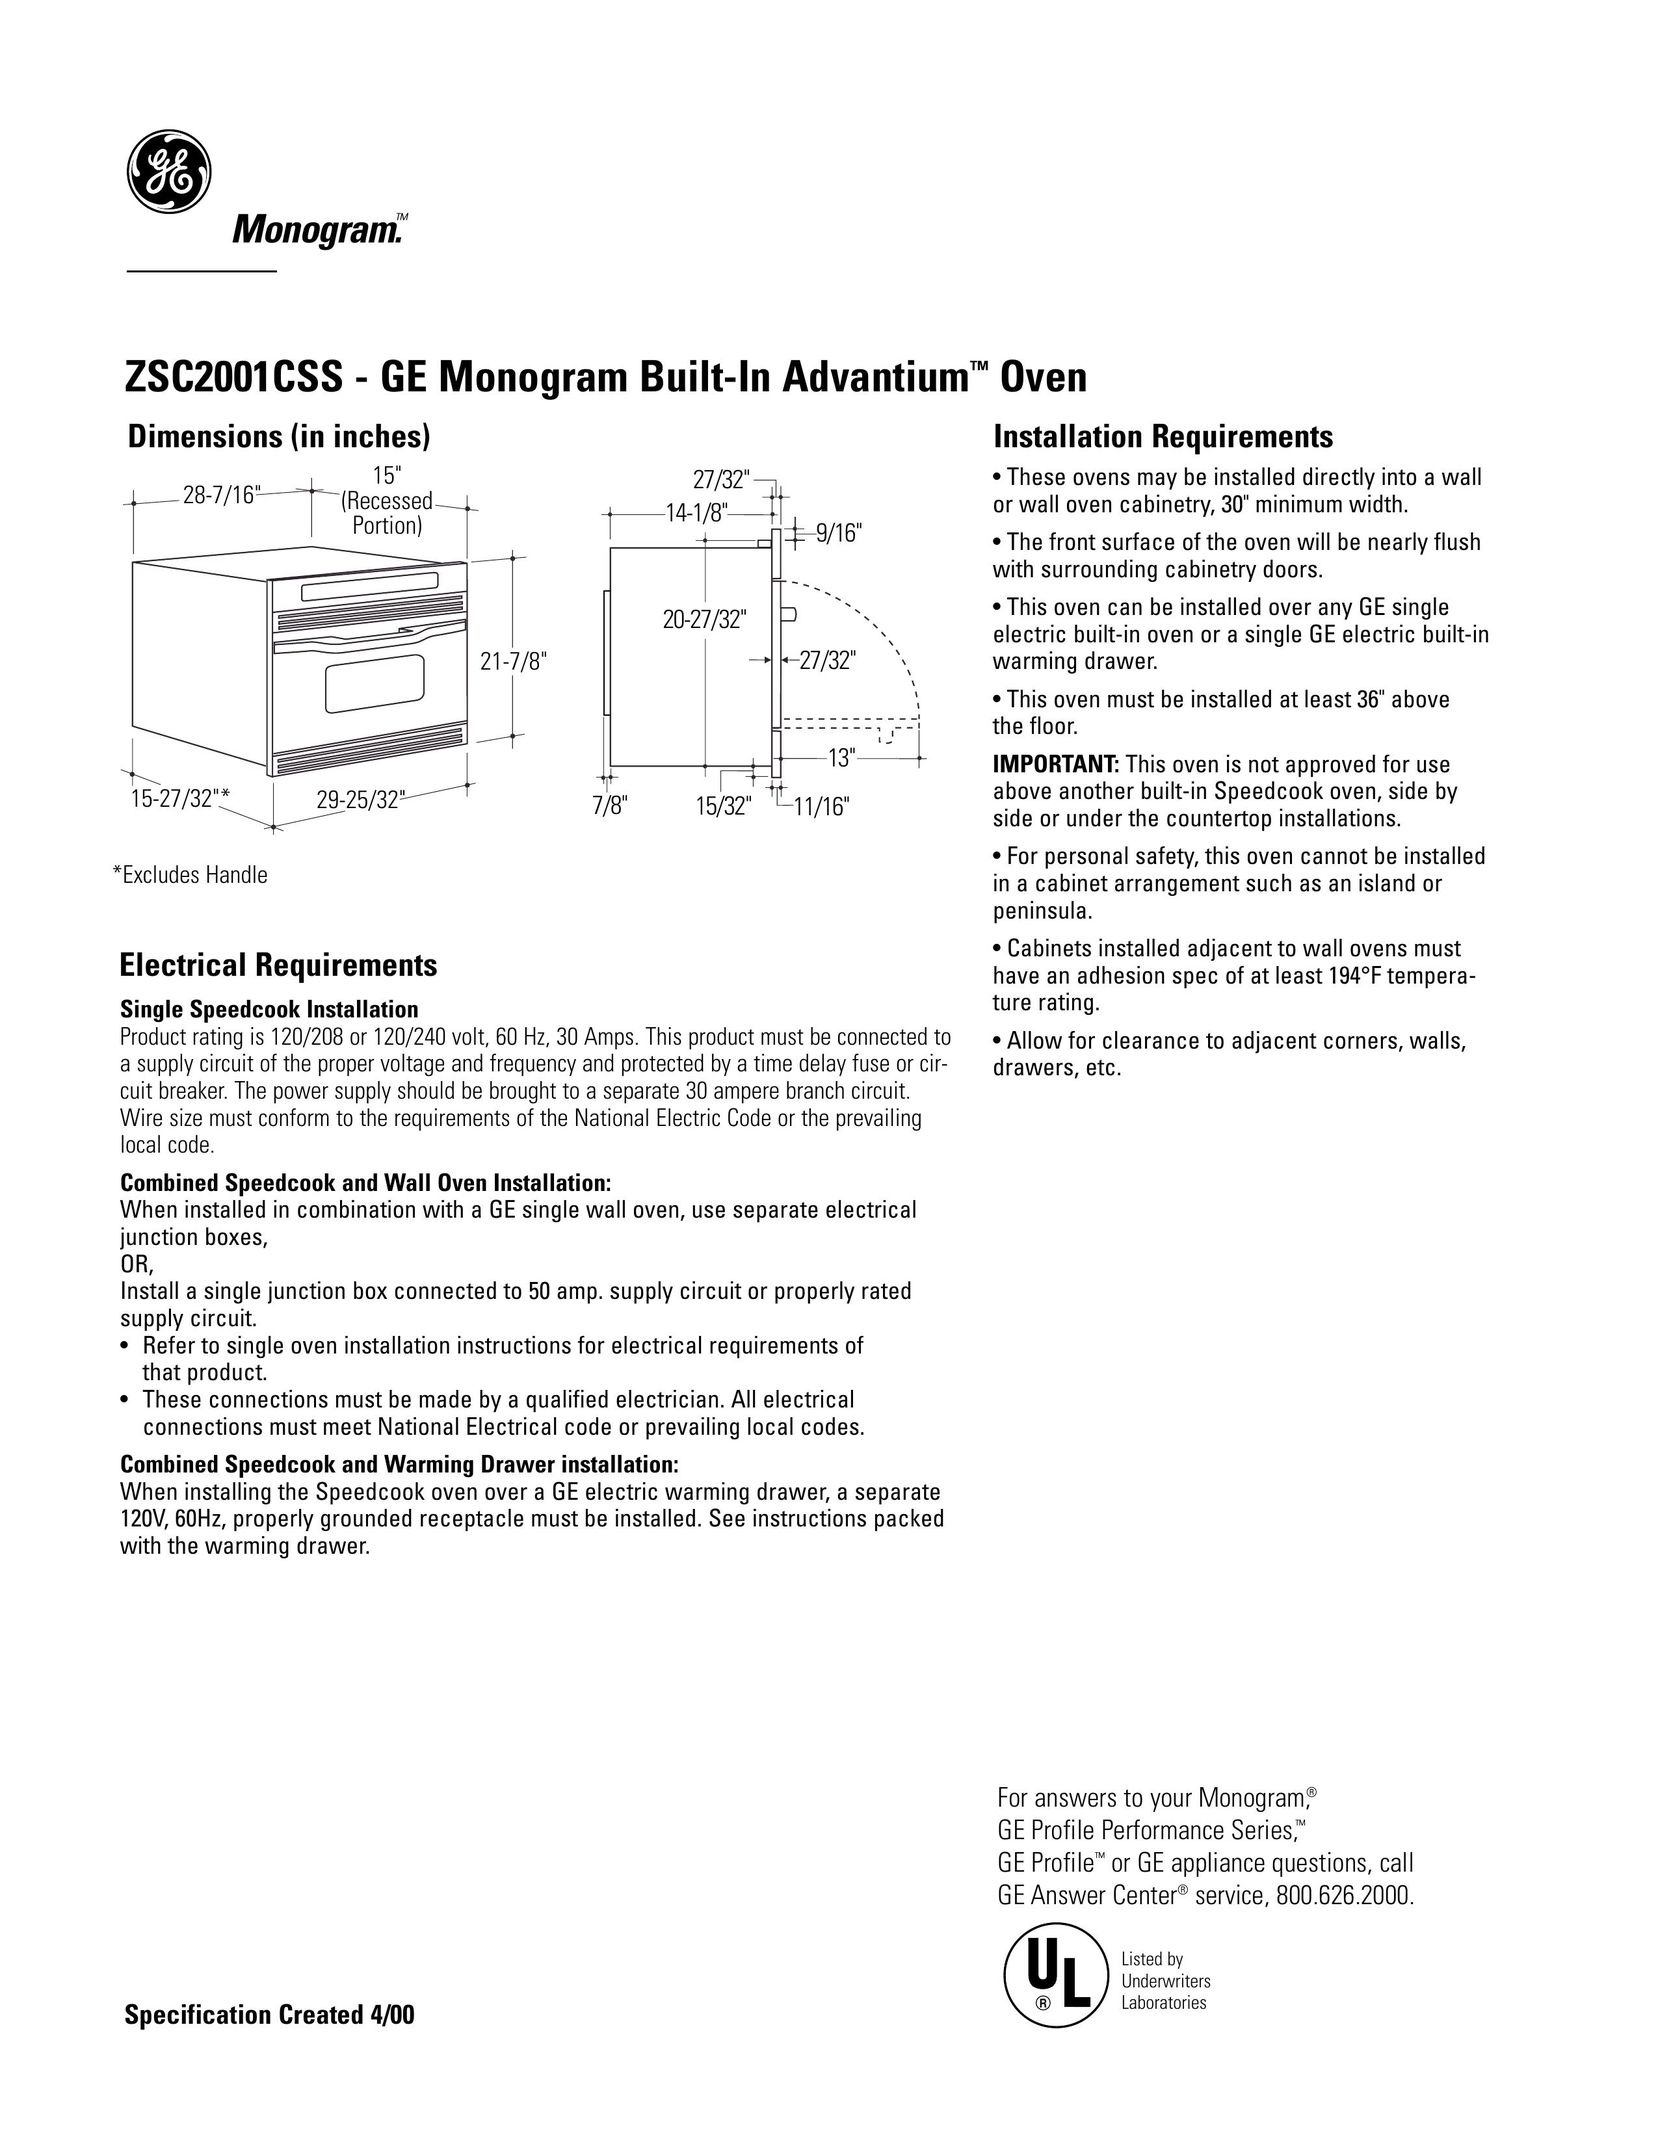 GE Monogram ZSC2001CSS Oven User Manual